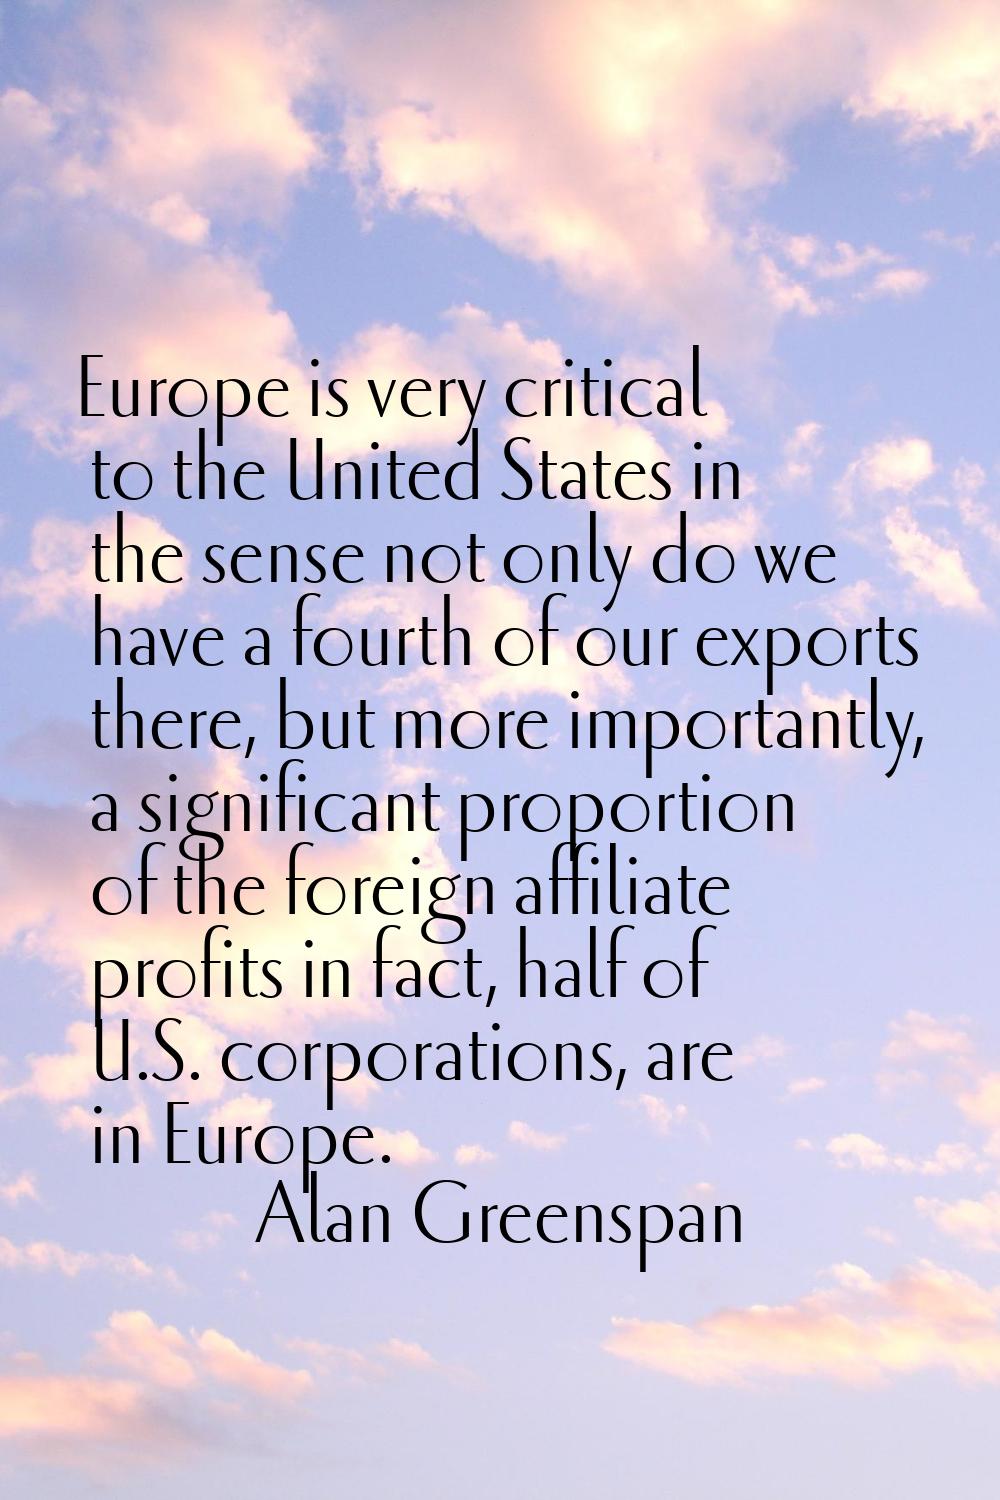 Europe is very critical to the United States in the sense not only do we have a fourth of our expor